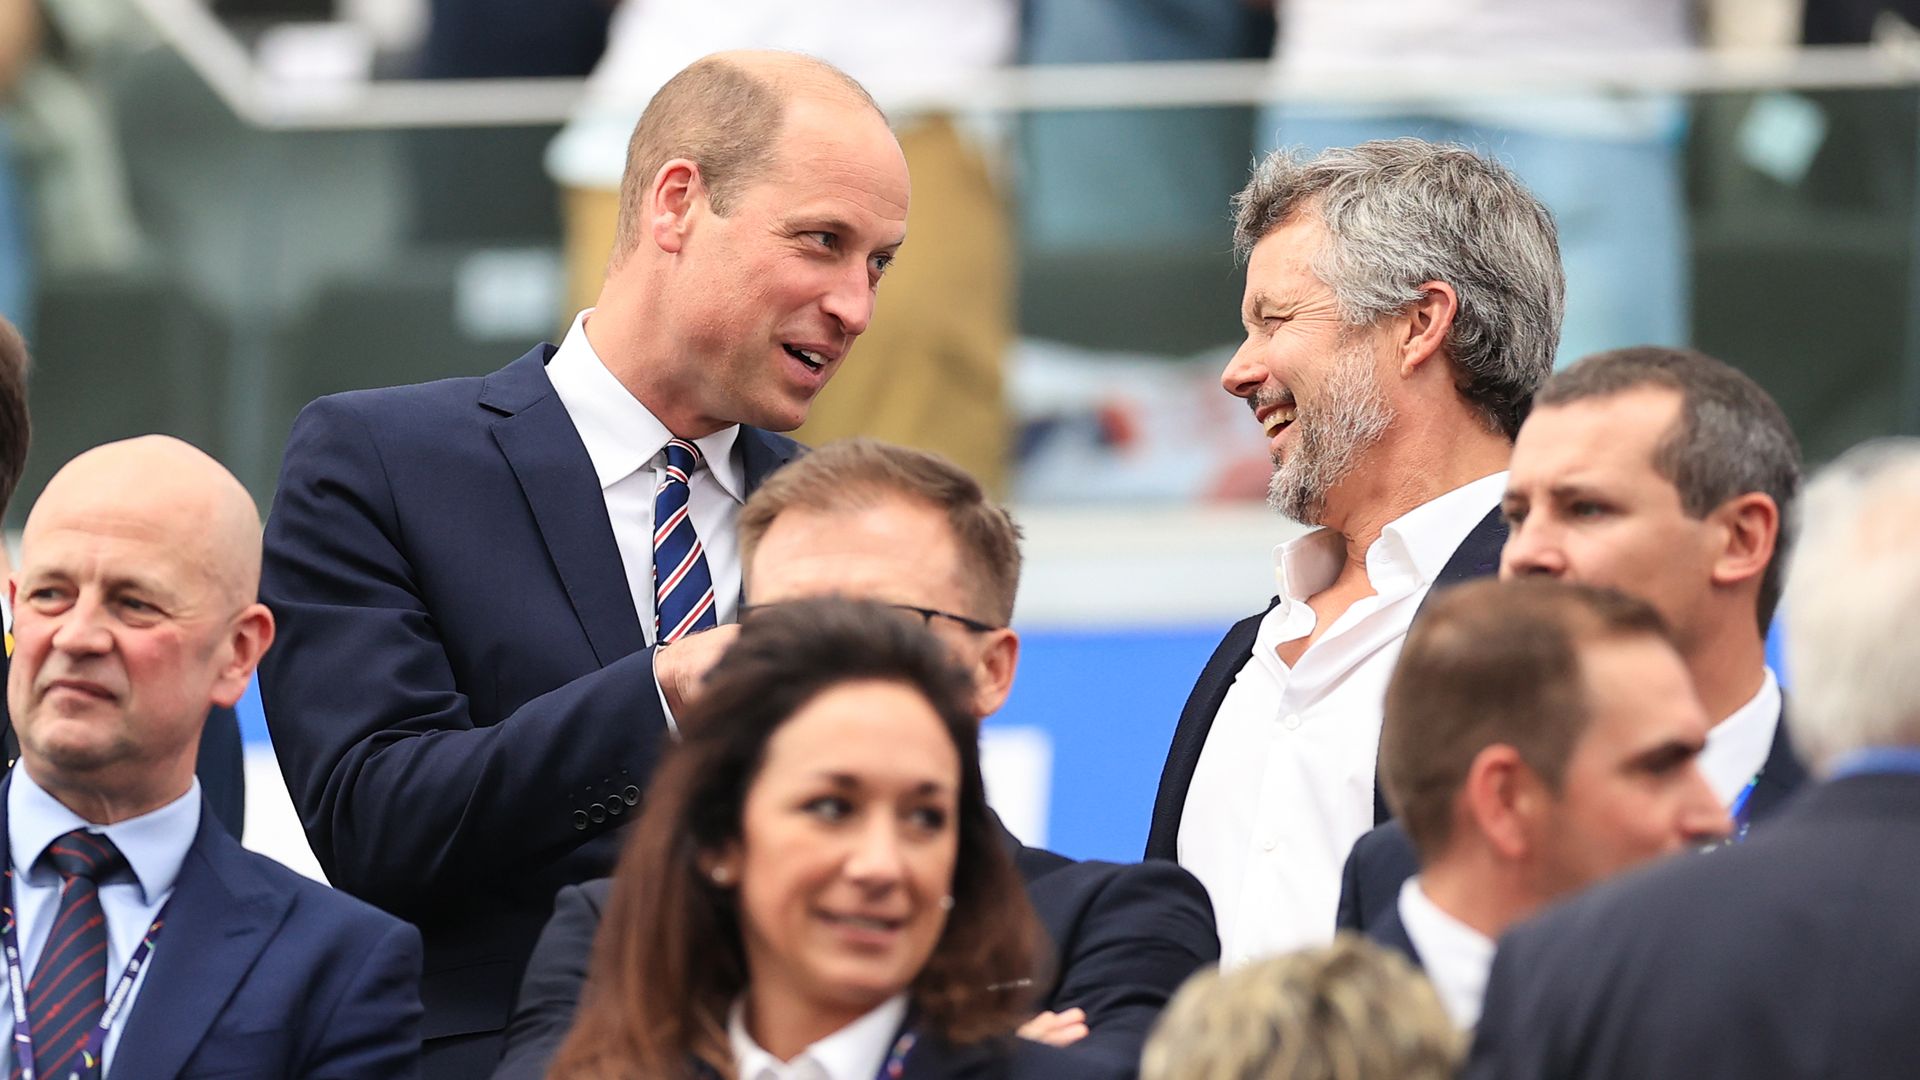 Prince William and King Frederik laughing